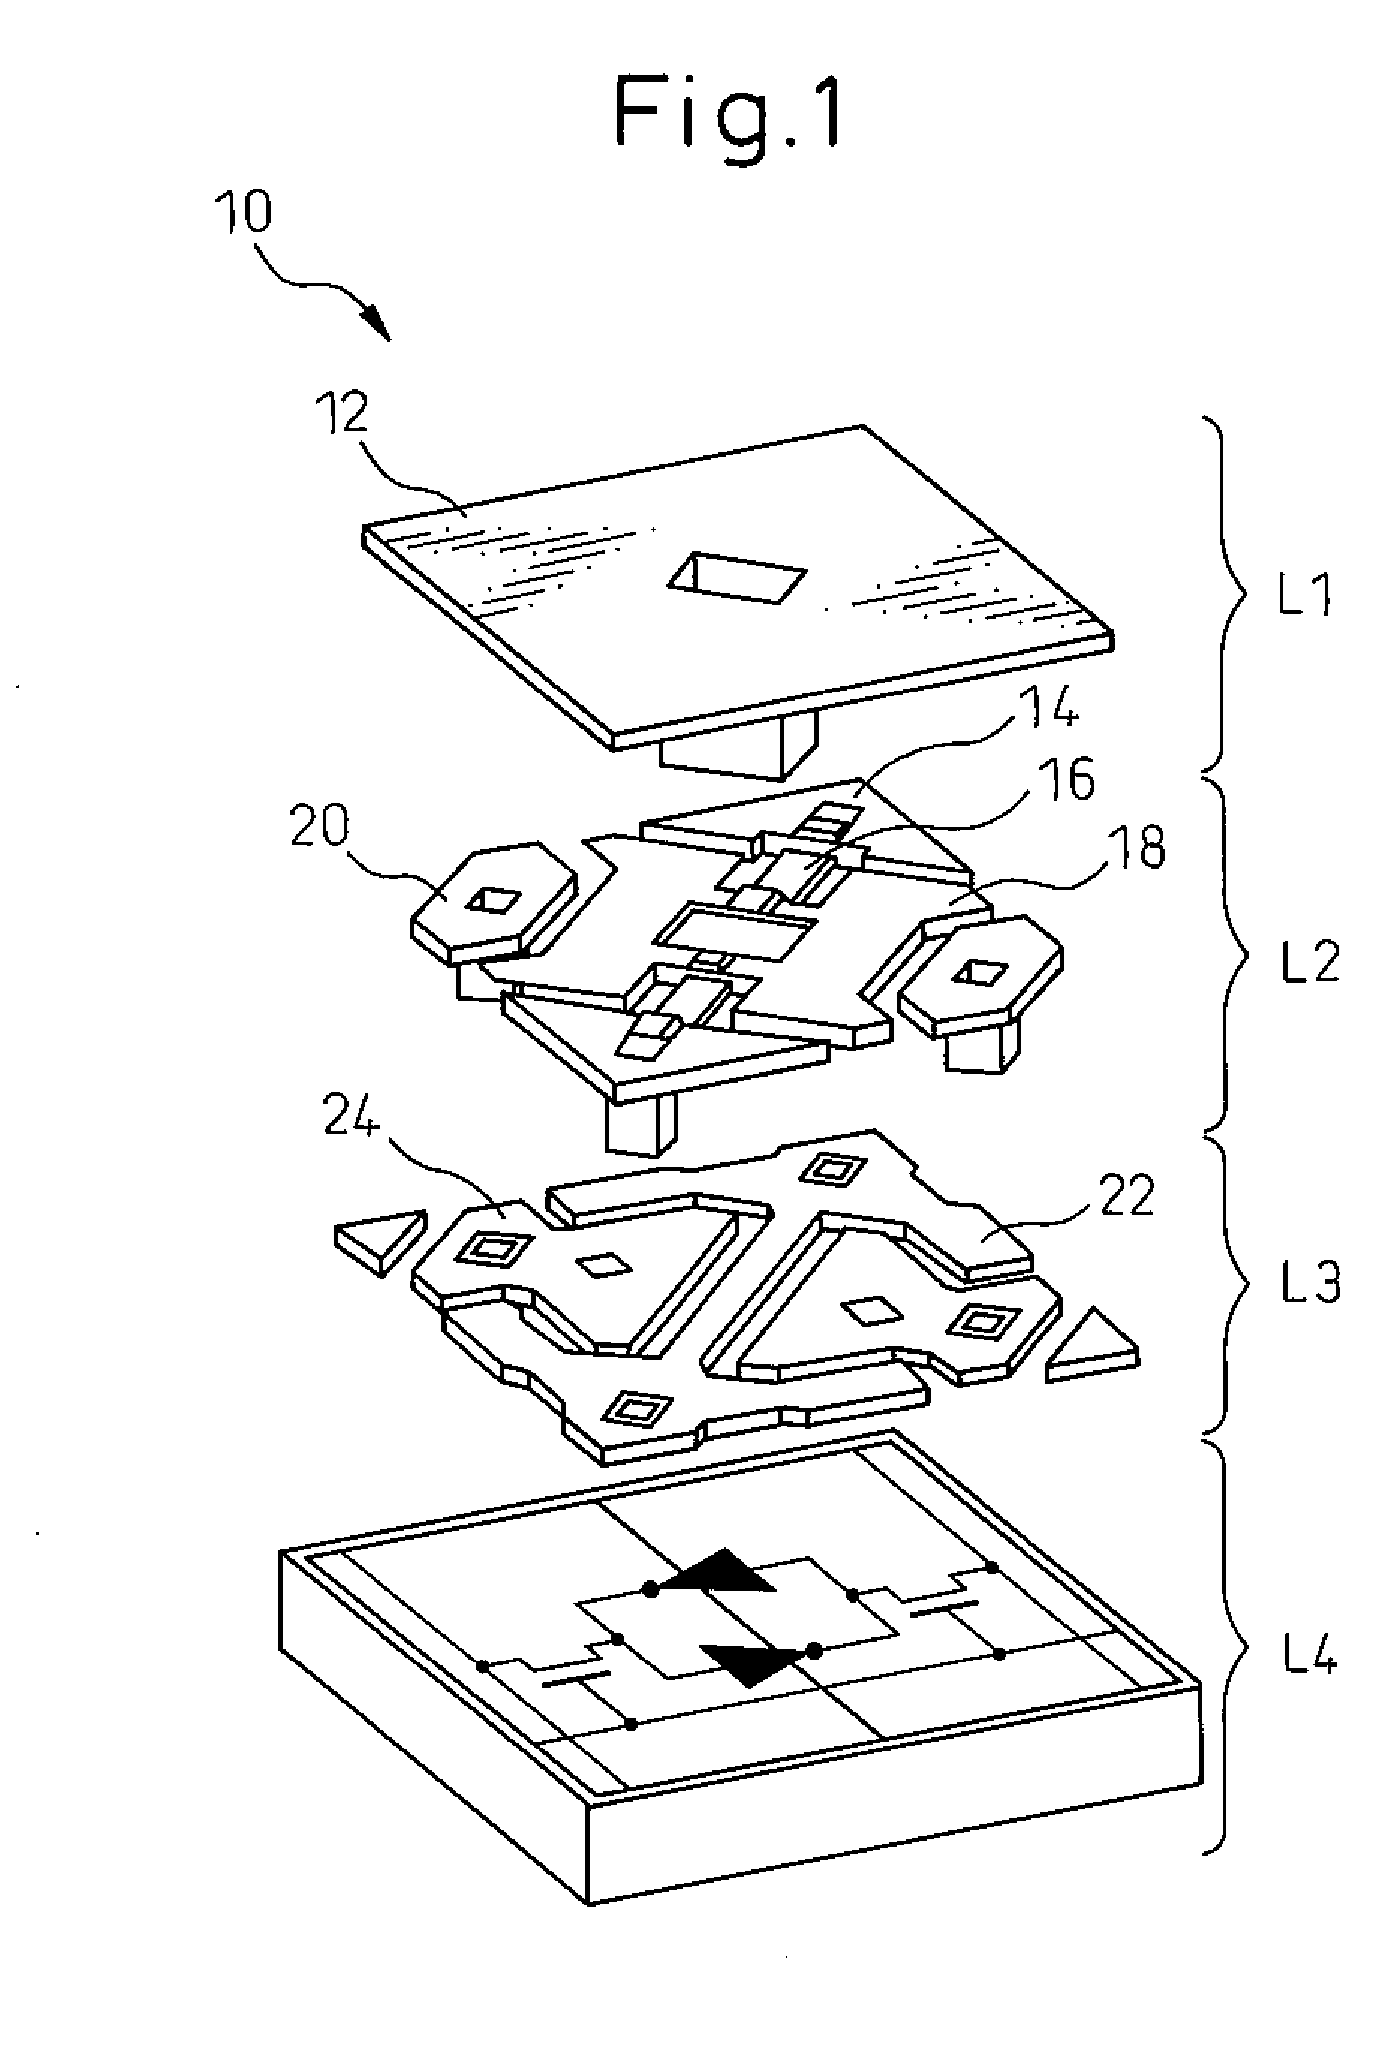 Movable device